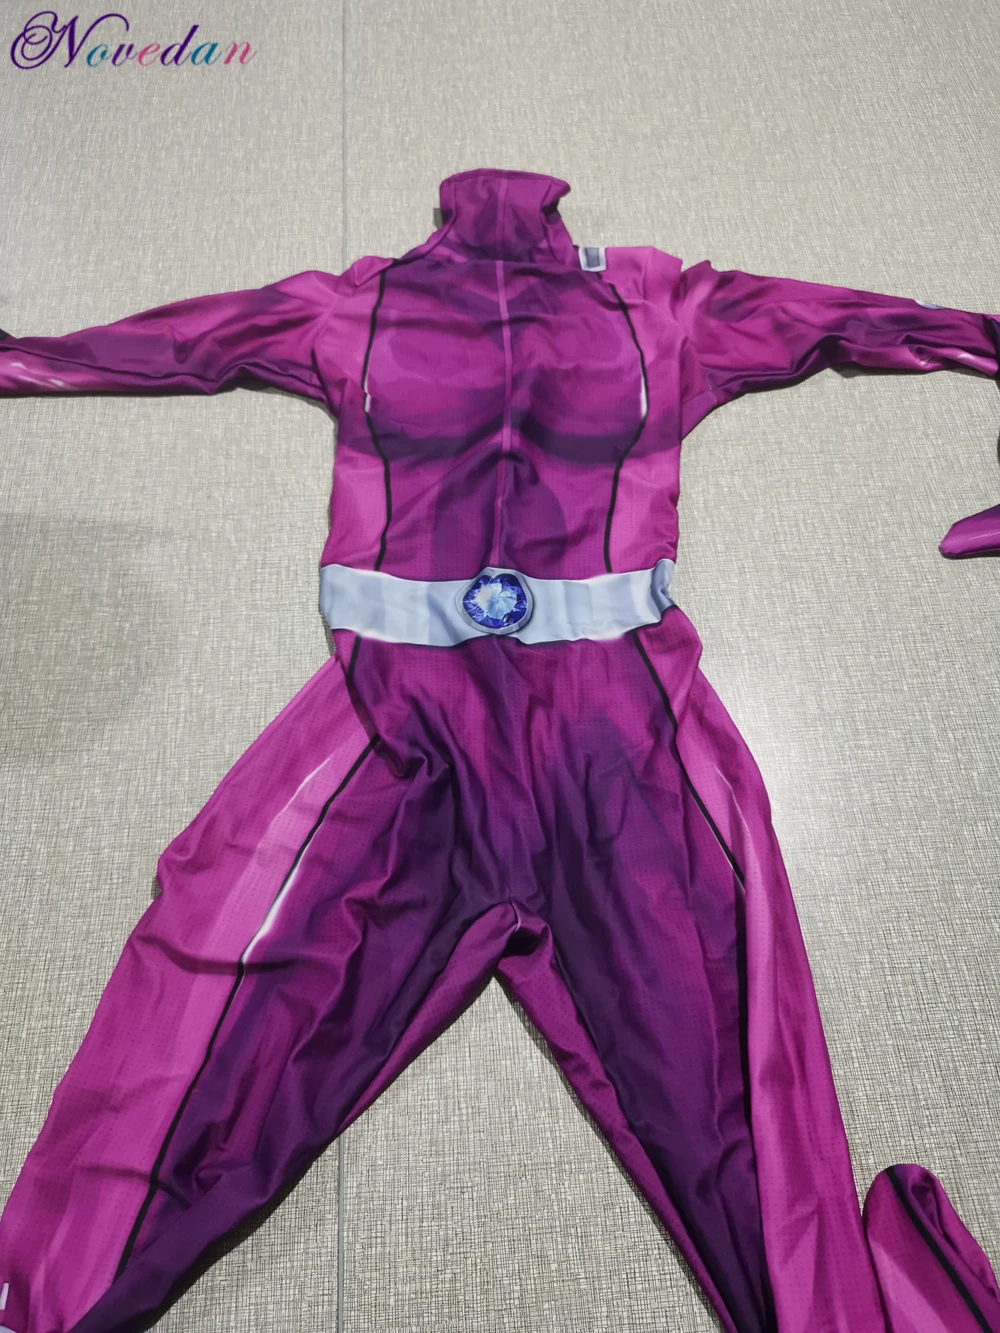 

Anime Totally Spies Mandy Cosplay Costume Jumpsuits Zentai Adult Kids Spandex Purple Bodysuit Tight Suit Catsuit Halloween